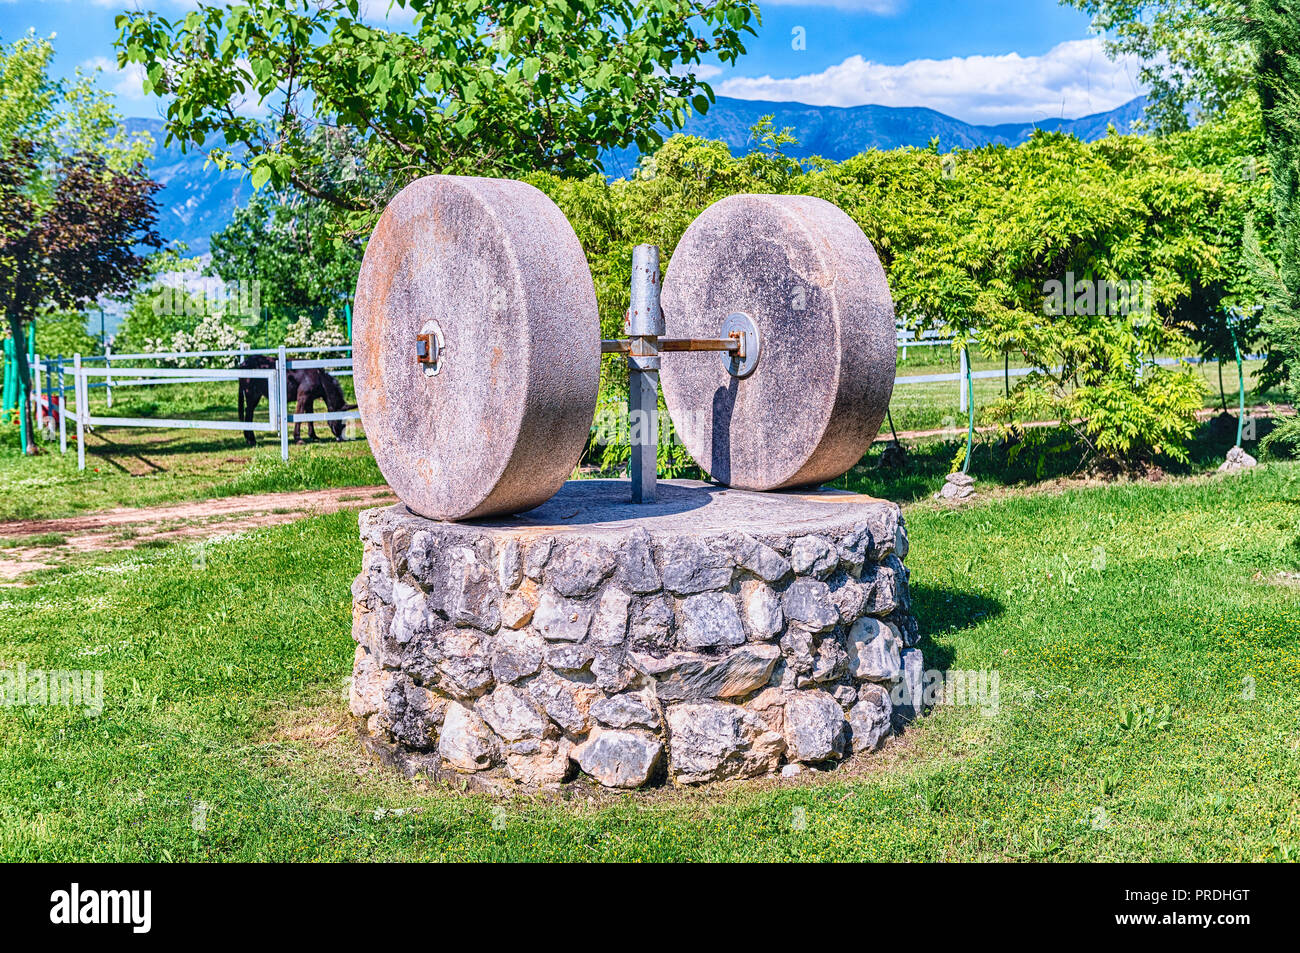 Ancient olive press with two millstones in the countryside Stock Photo